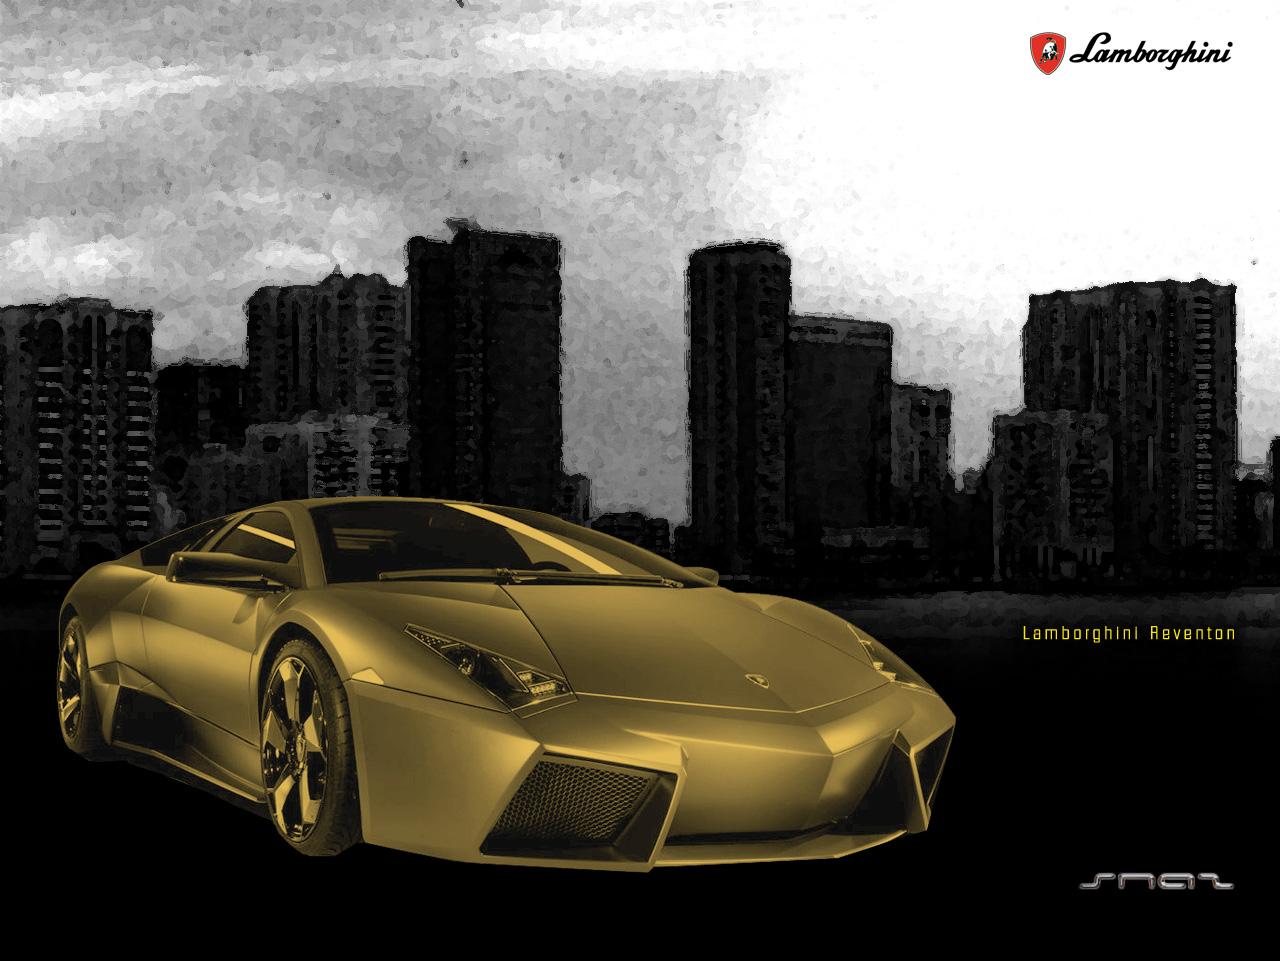 You are viewing the Lamborghini wallpaper named 